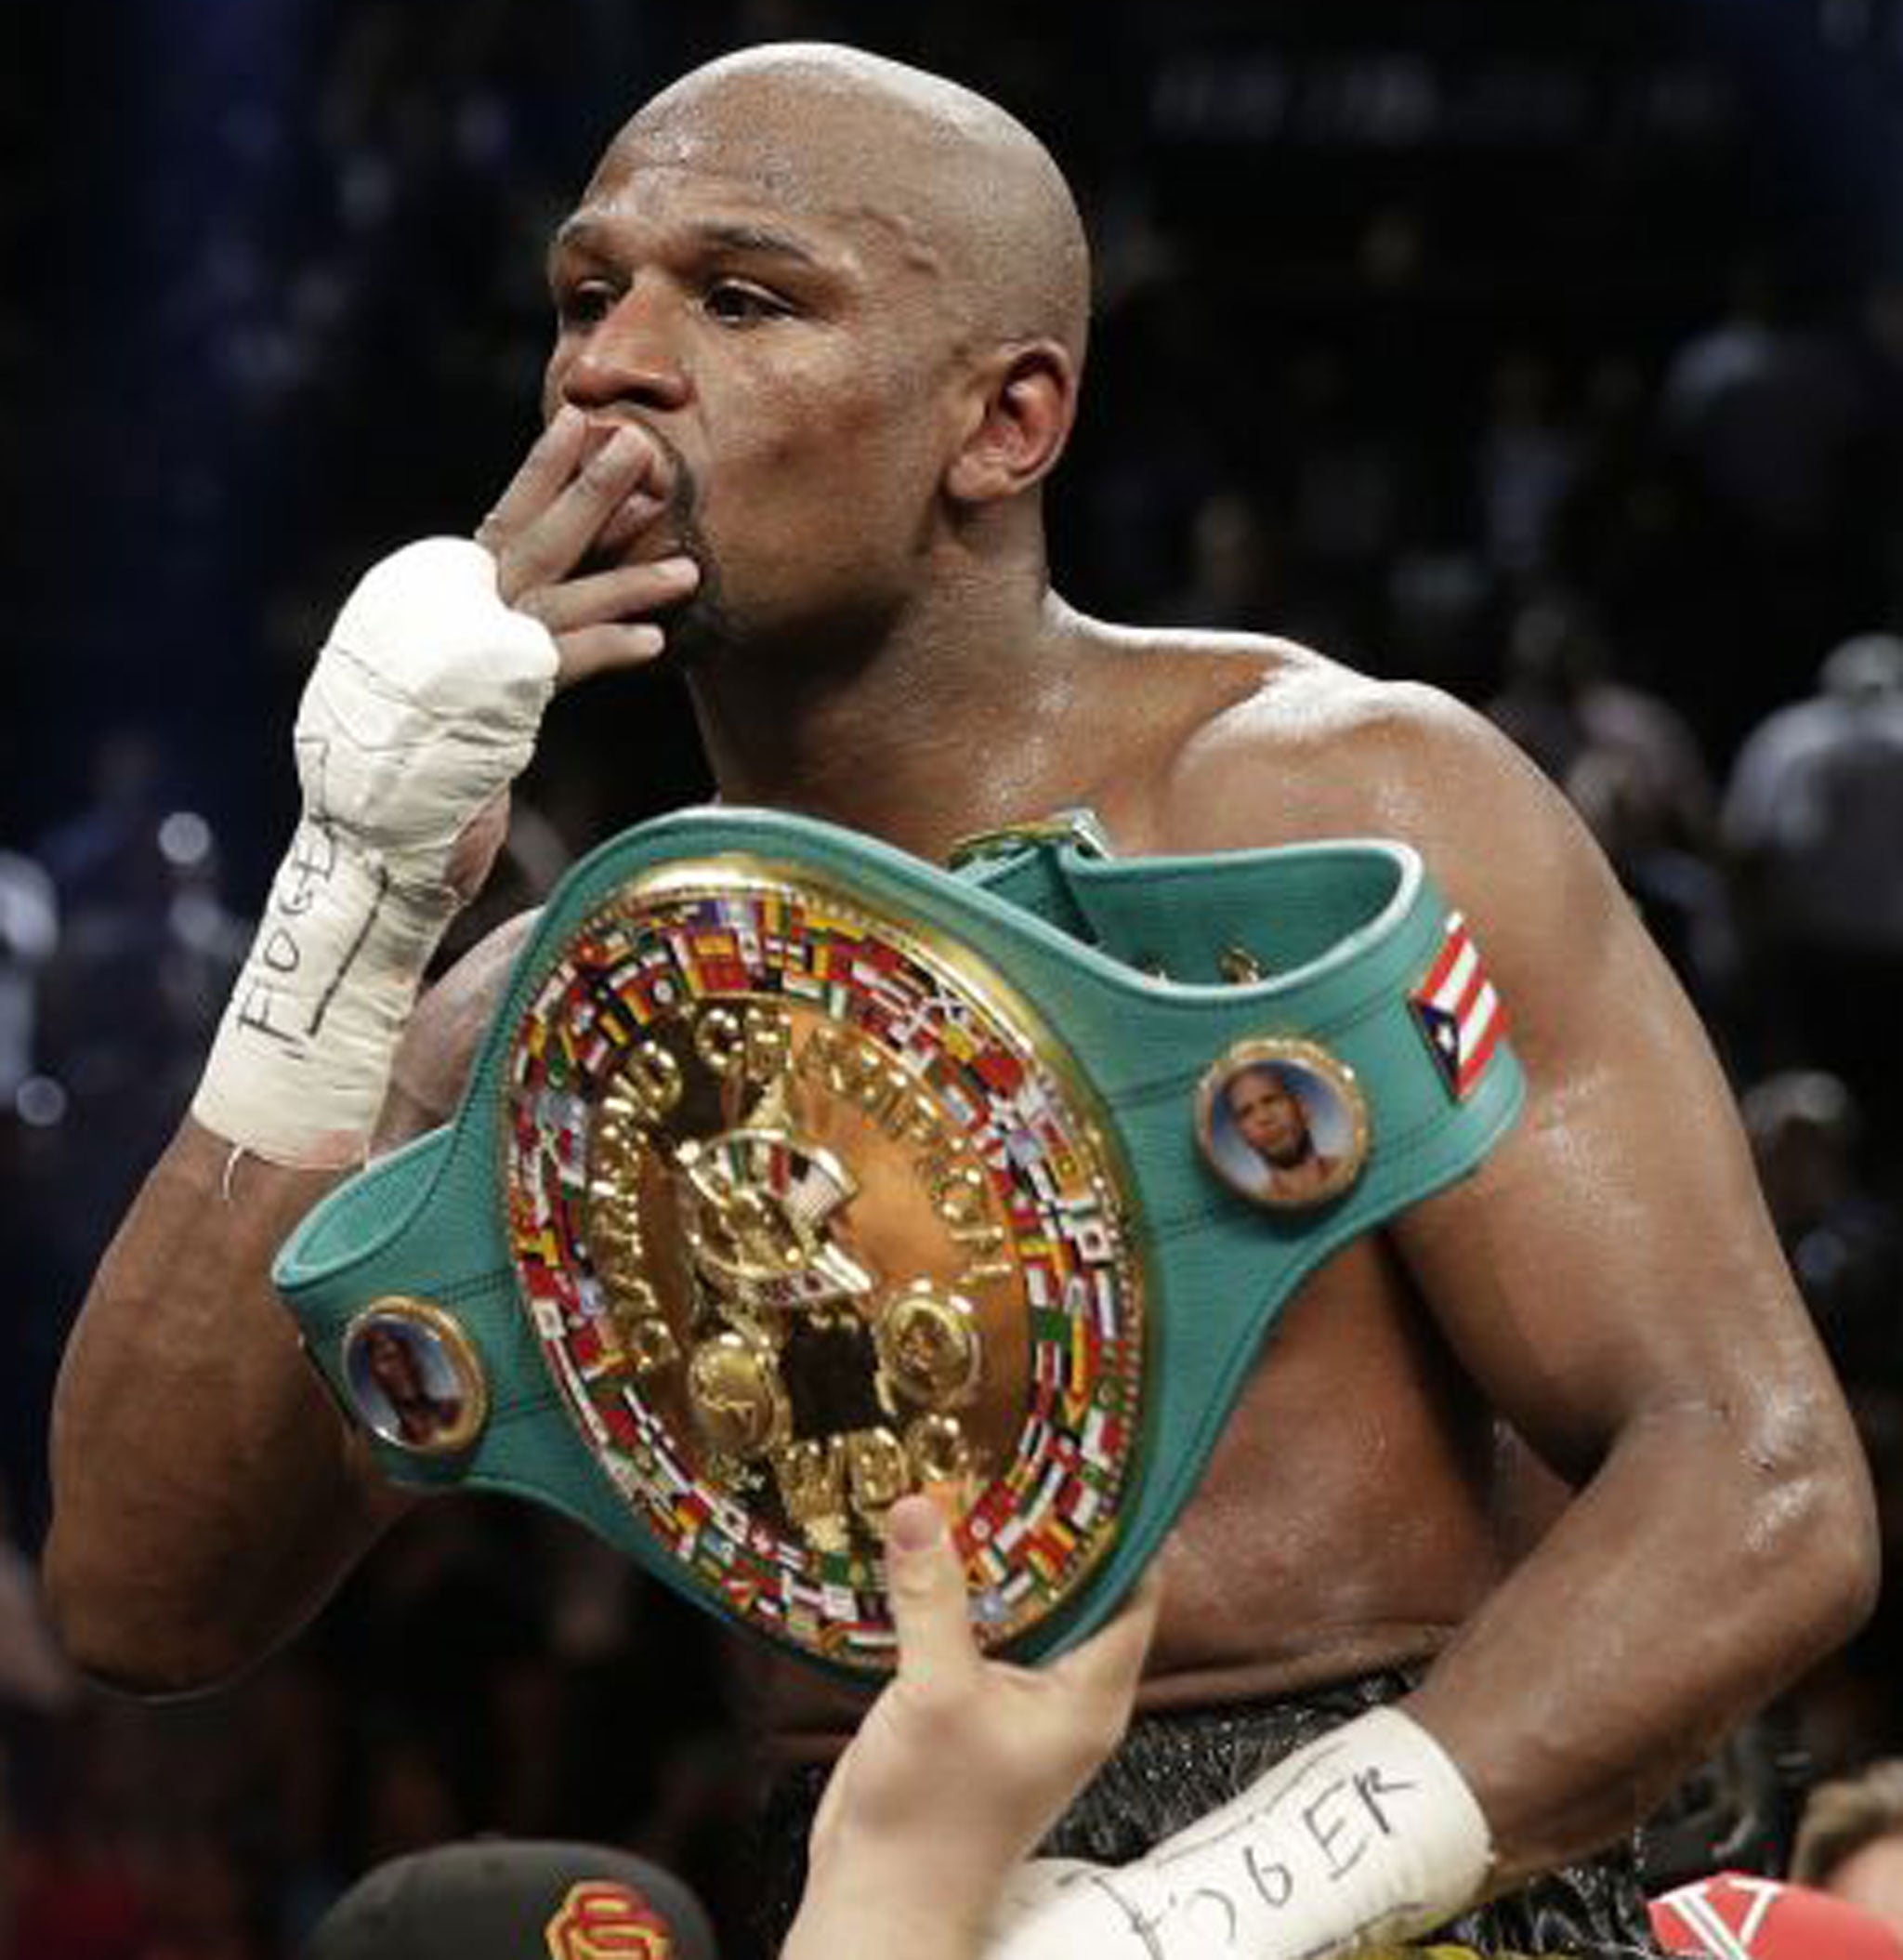 Floyd Mayweather celebrates another victory on Saturday